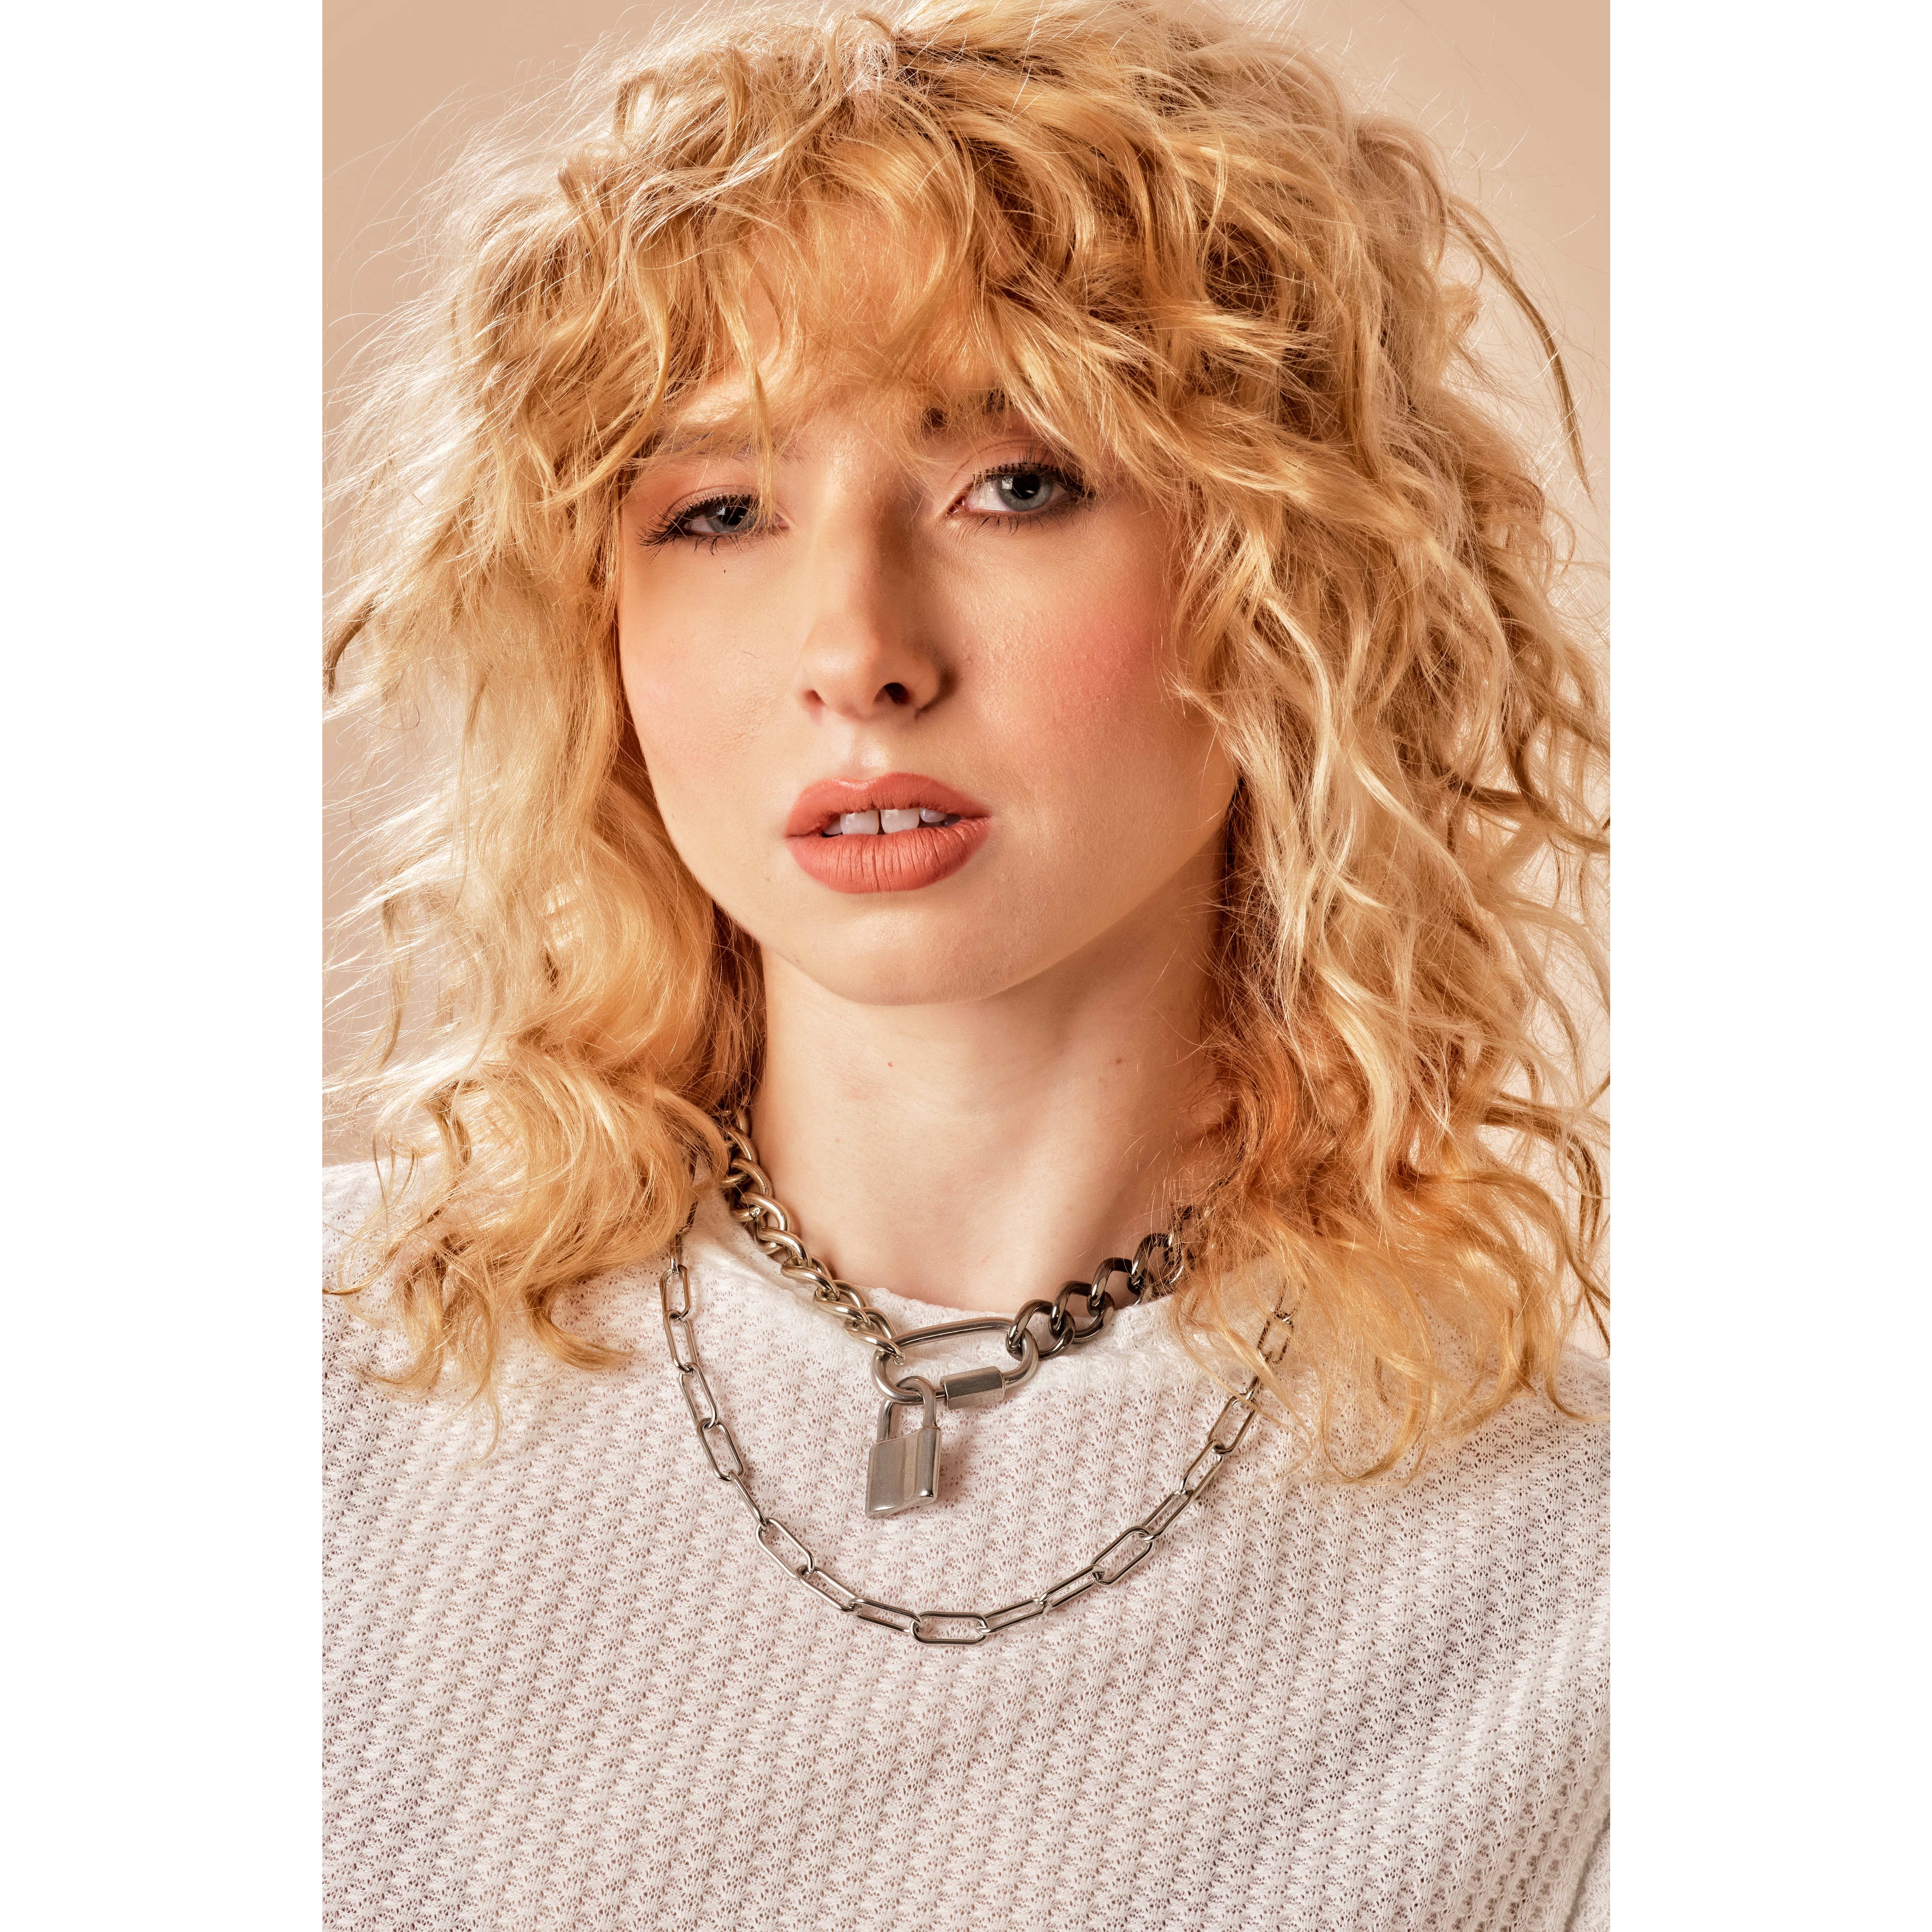 Chain Reaction Silver Locked Necklace | Chain Necklace Women | Chain Reaction Necklace - JaJaara